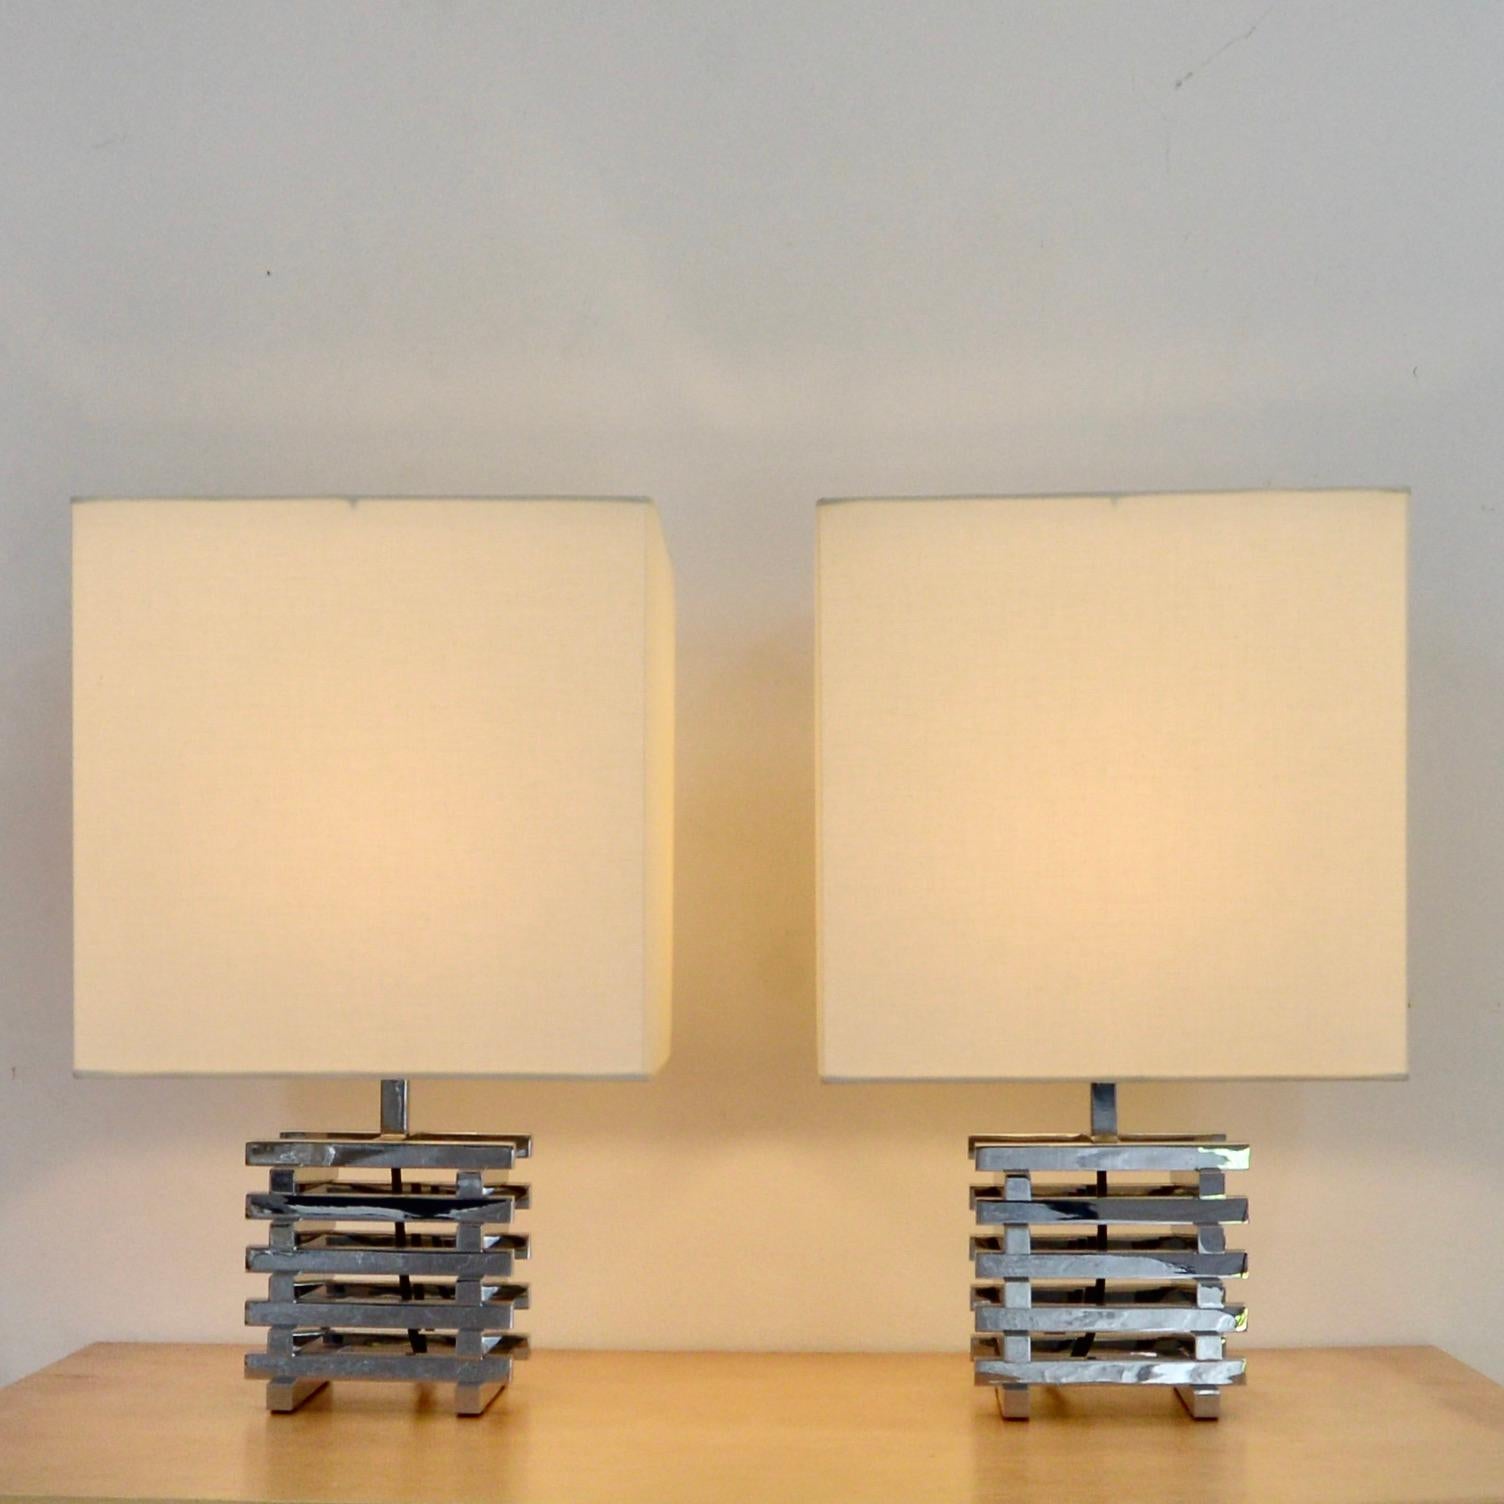 Pair of vintage Italian 1970s polished chrome and fabric table lamps by Romeo Rega. Fully rewired with a single E26 medium based socket per lamp, ready to be used in the USA. 
Measurements:
Height: 20”
Depth: 12”
Width: 12”.